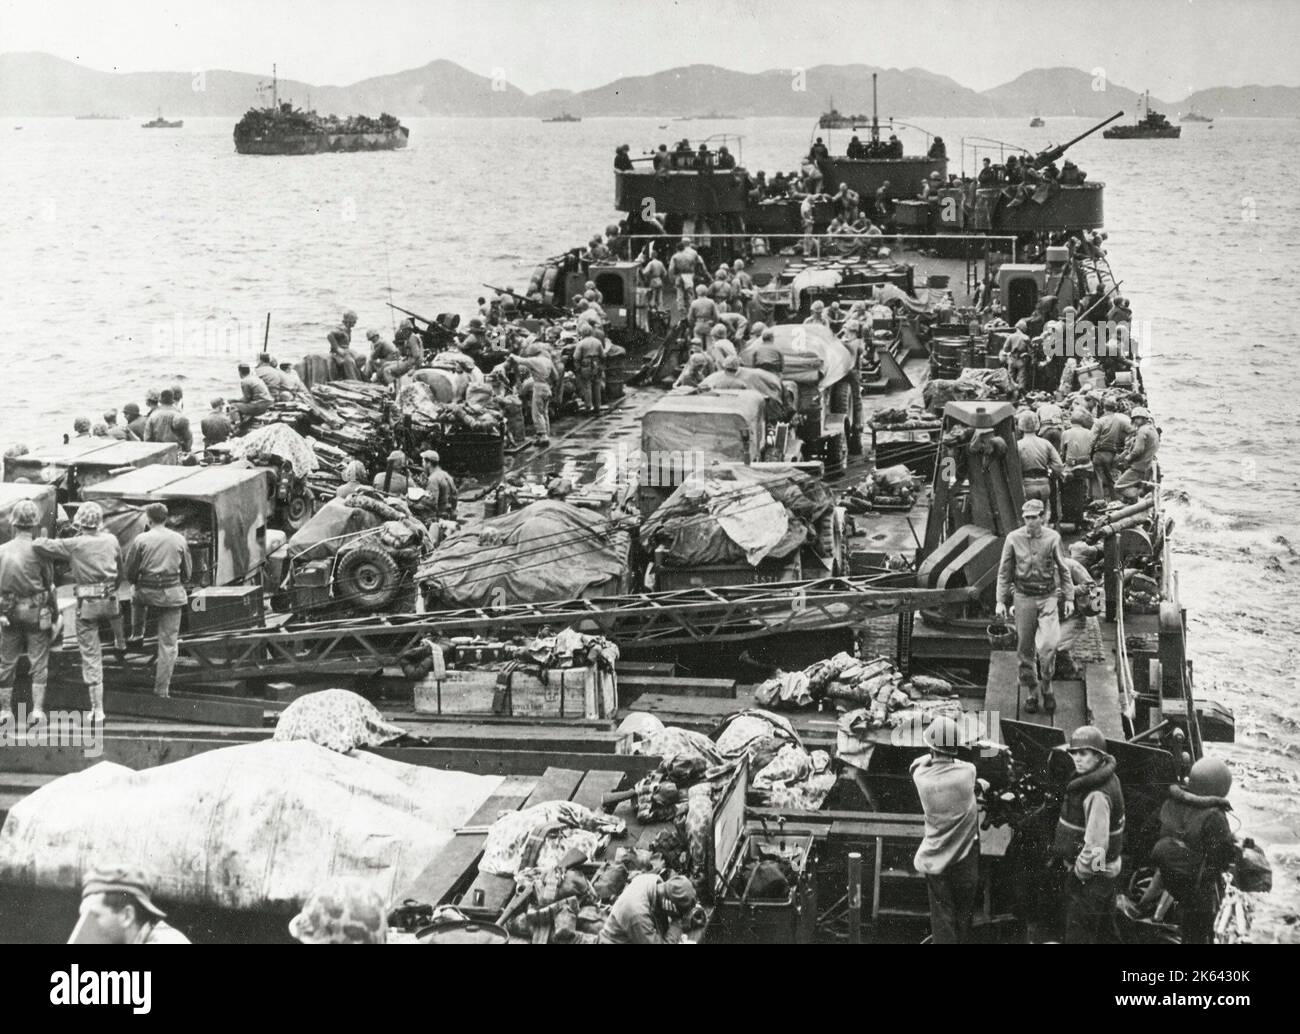 Vintage World War II photograph - US landing craft approaches Iheya Island in the Pacific Stock Photo